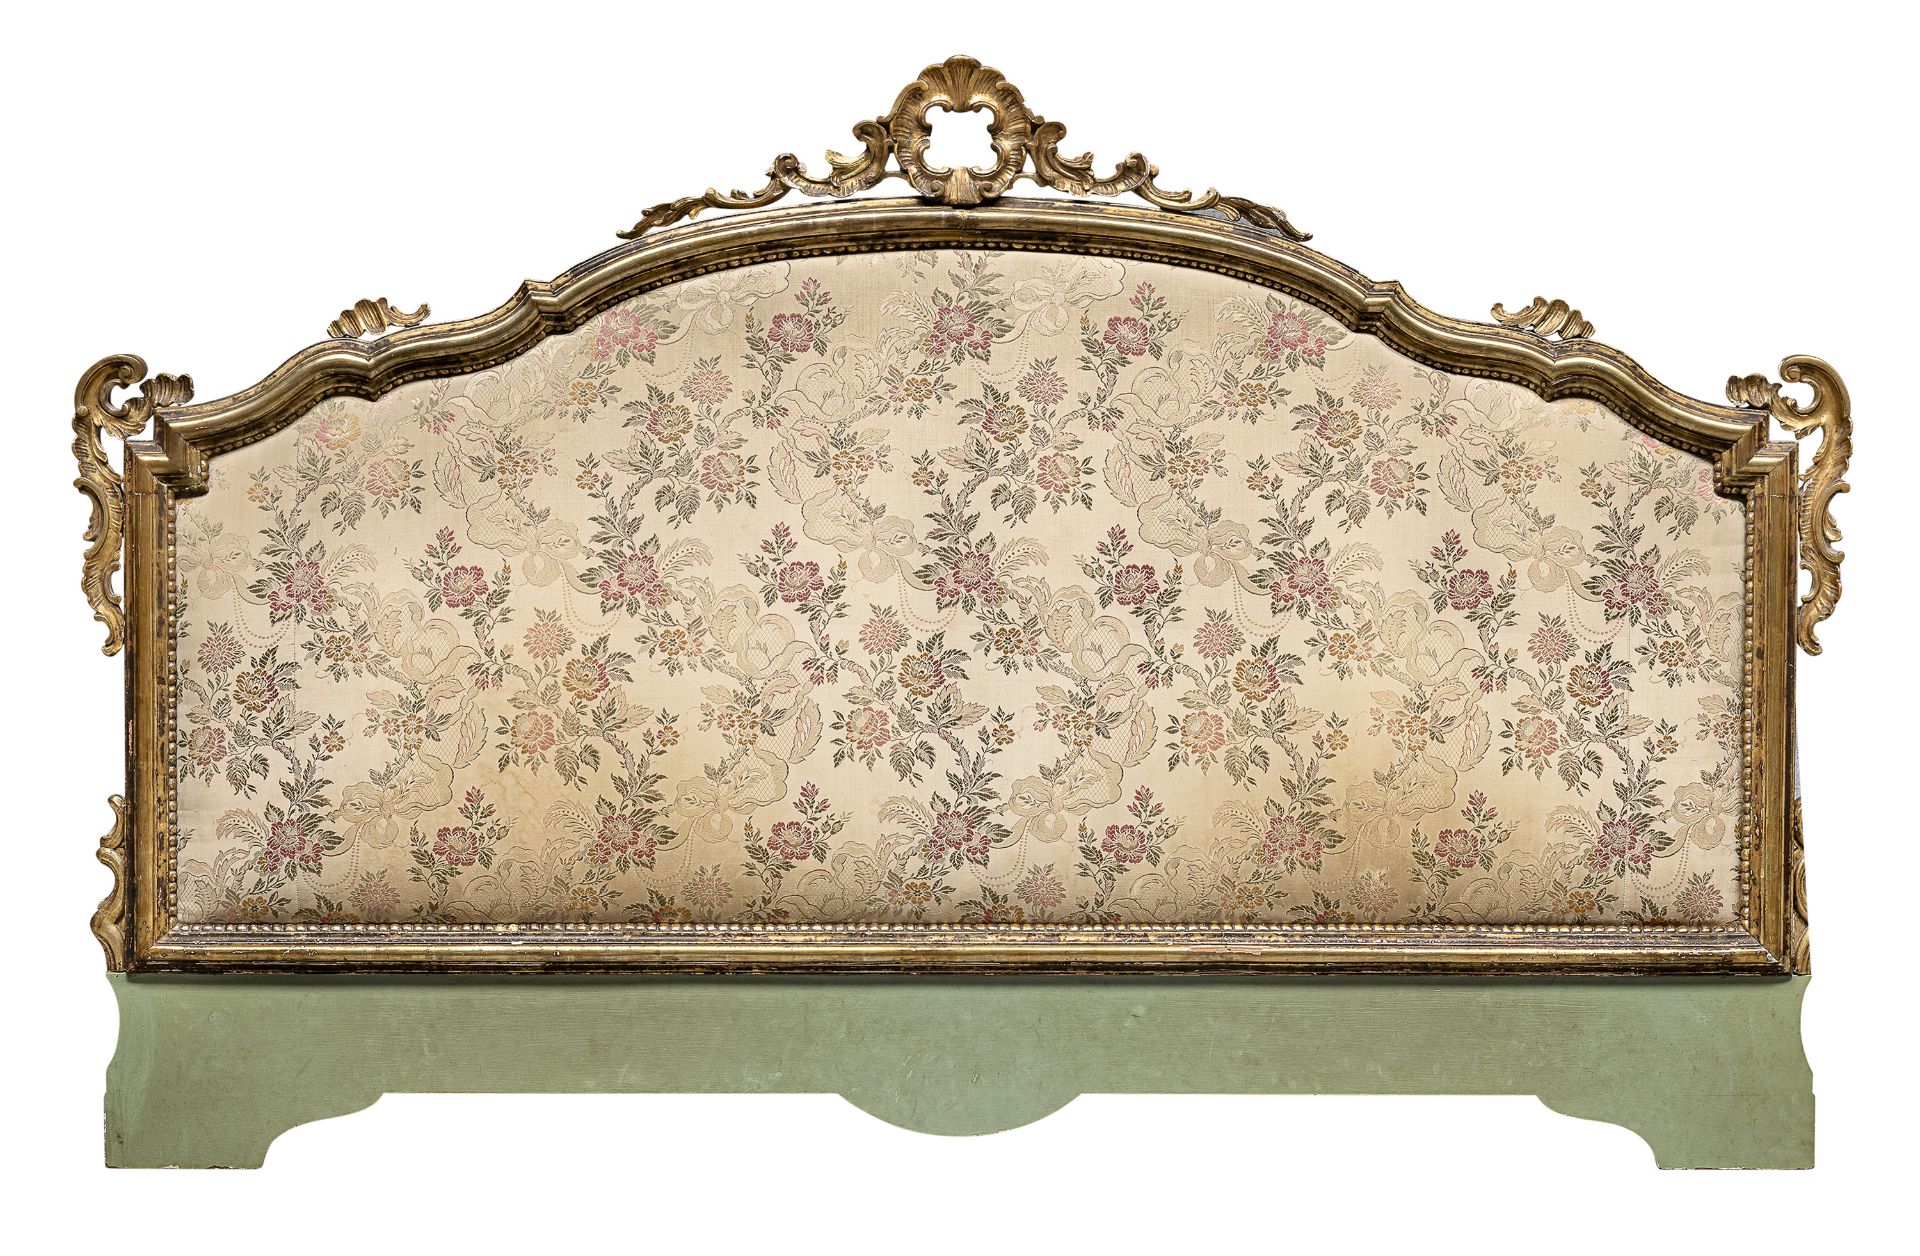 DOUBLE BED HEADBOARD ELEMENTS OF THE 18TH CENTURY